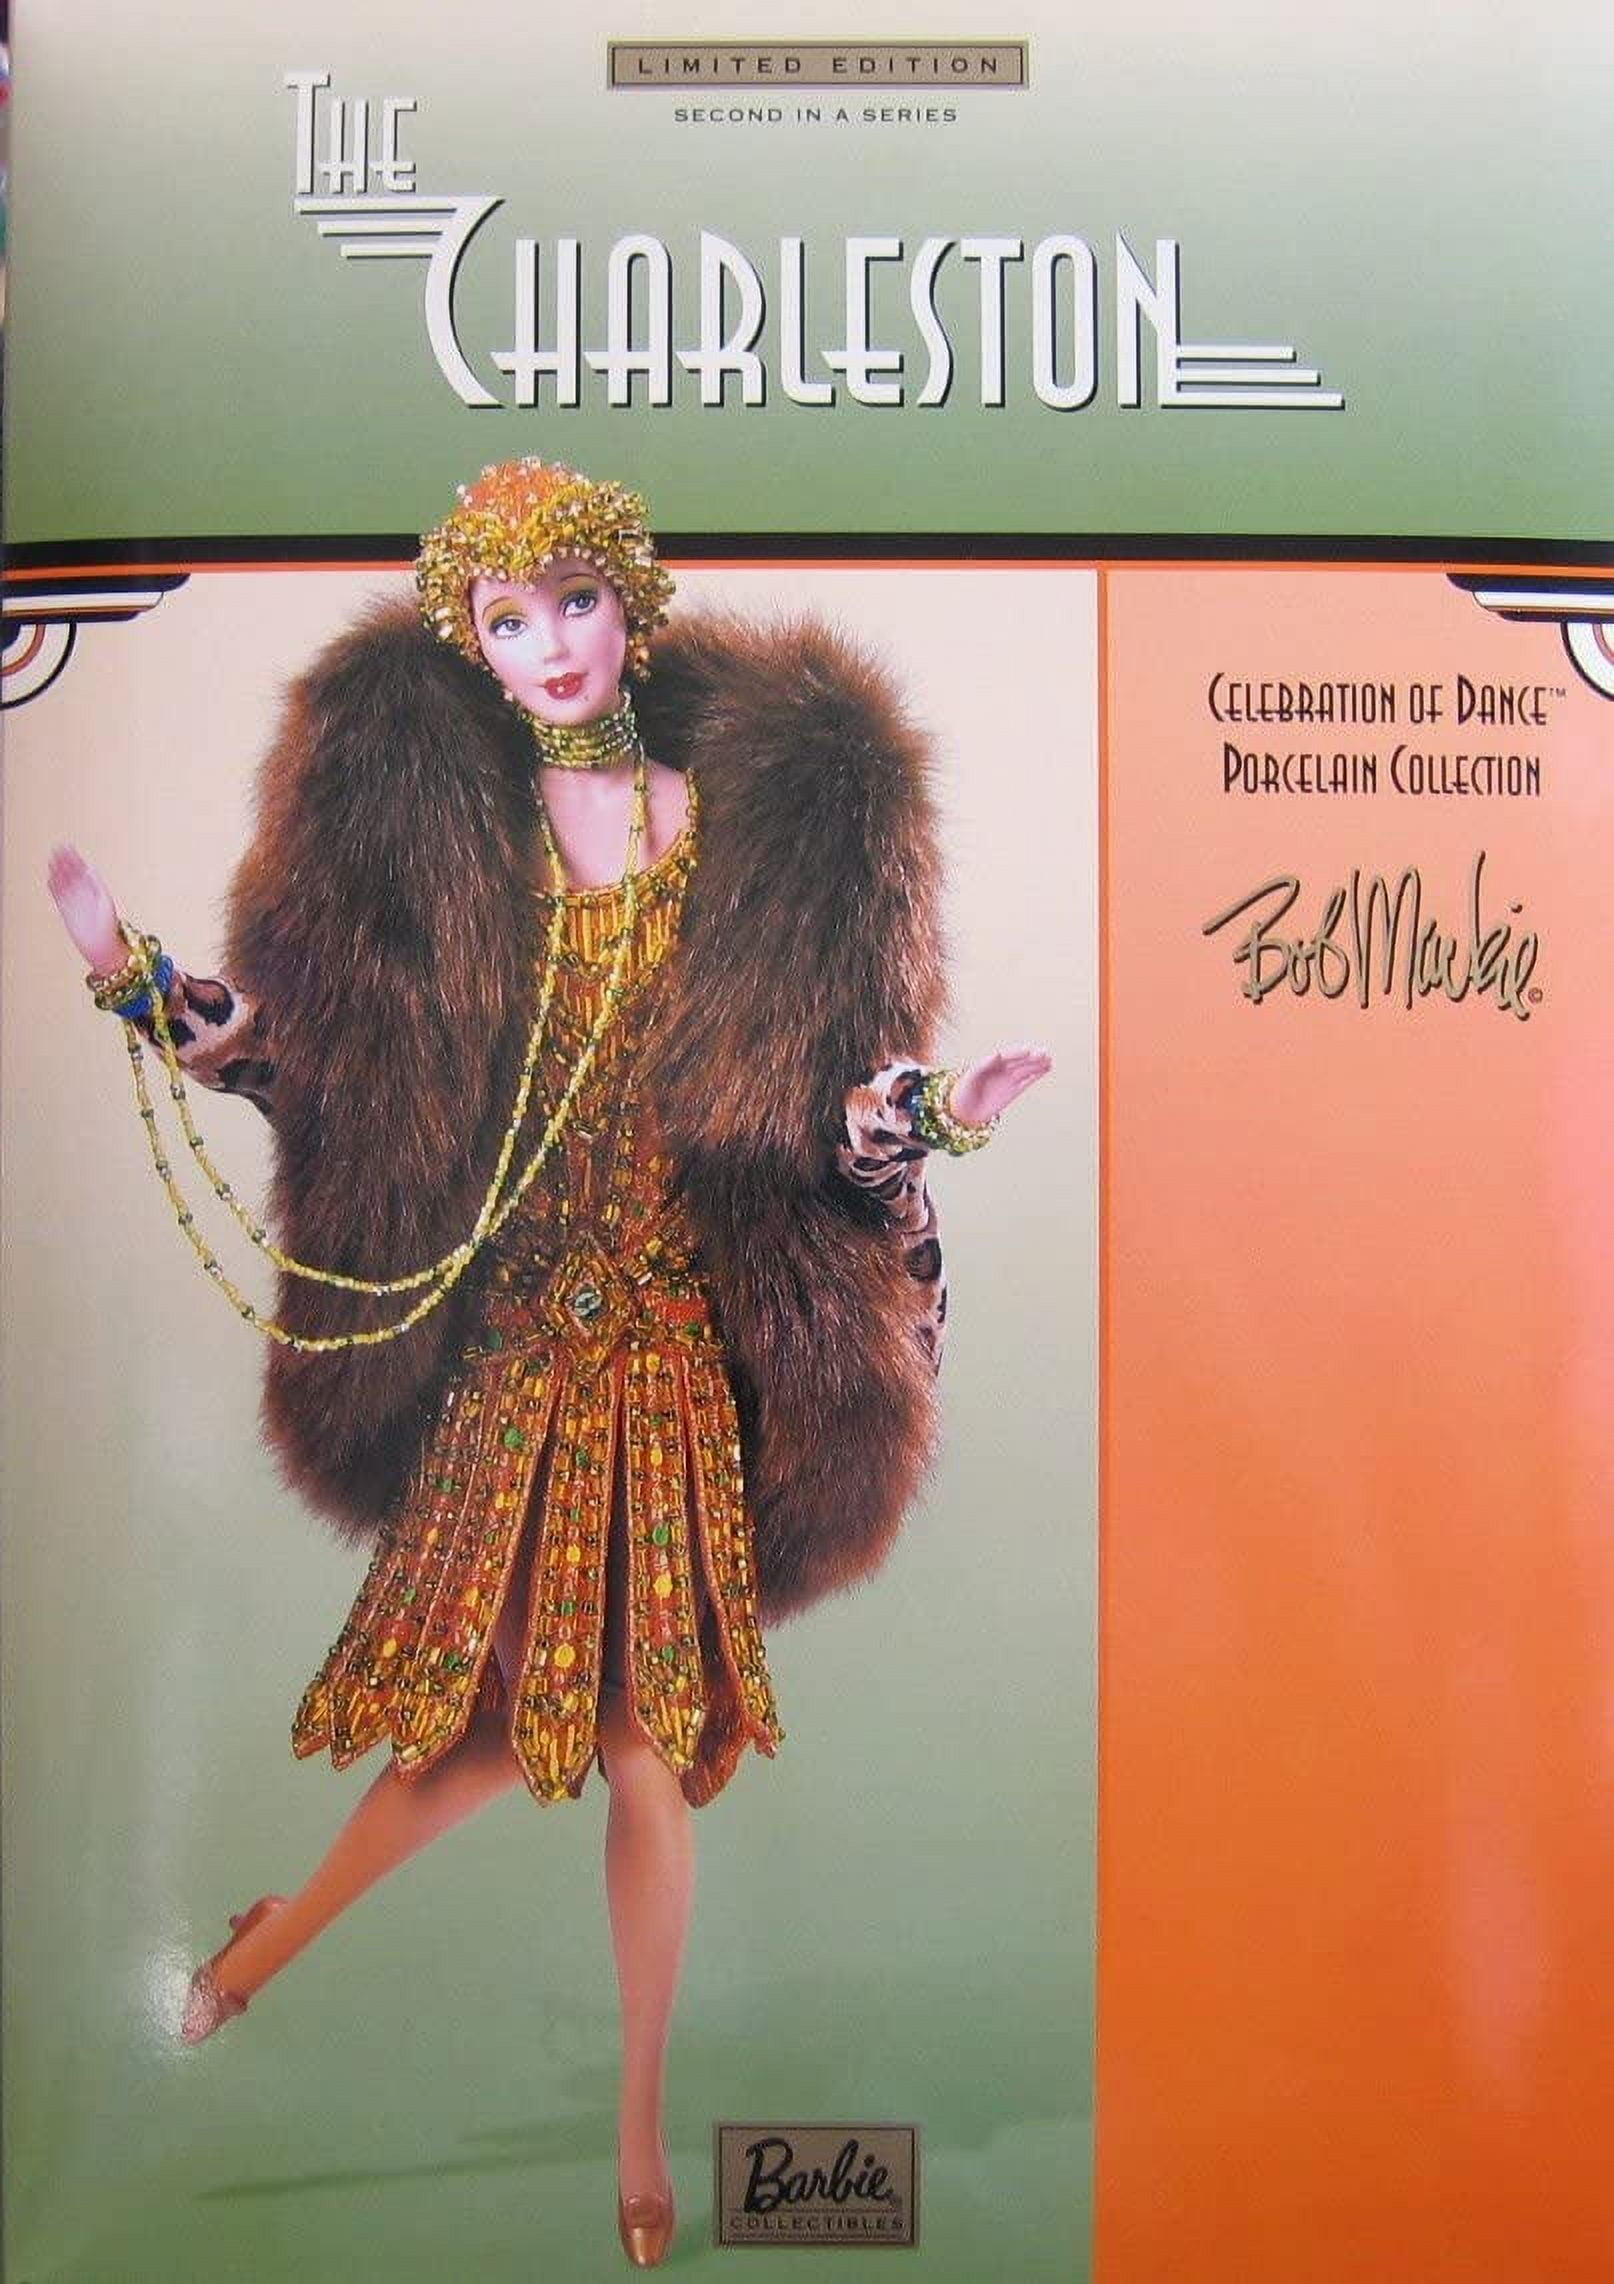 Doll　Shipper　Charleston　by　Celebration　Barbie-　Limited　Porcelain　Dance　in　2nd　Bob　Barbie　of　Series　(2000)　The　w　Mackie　Edition